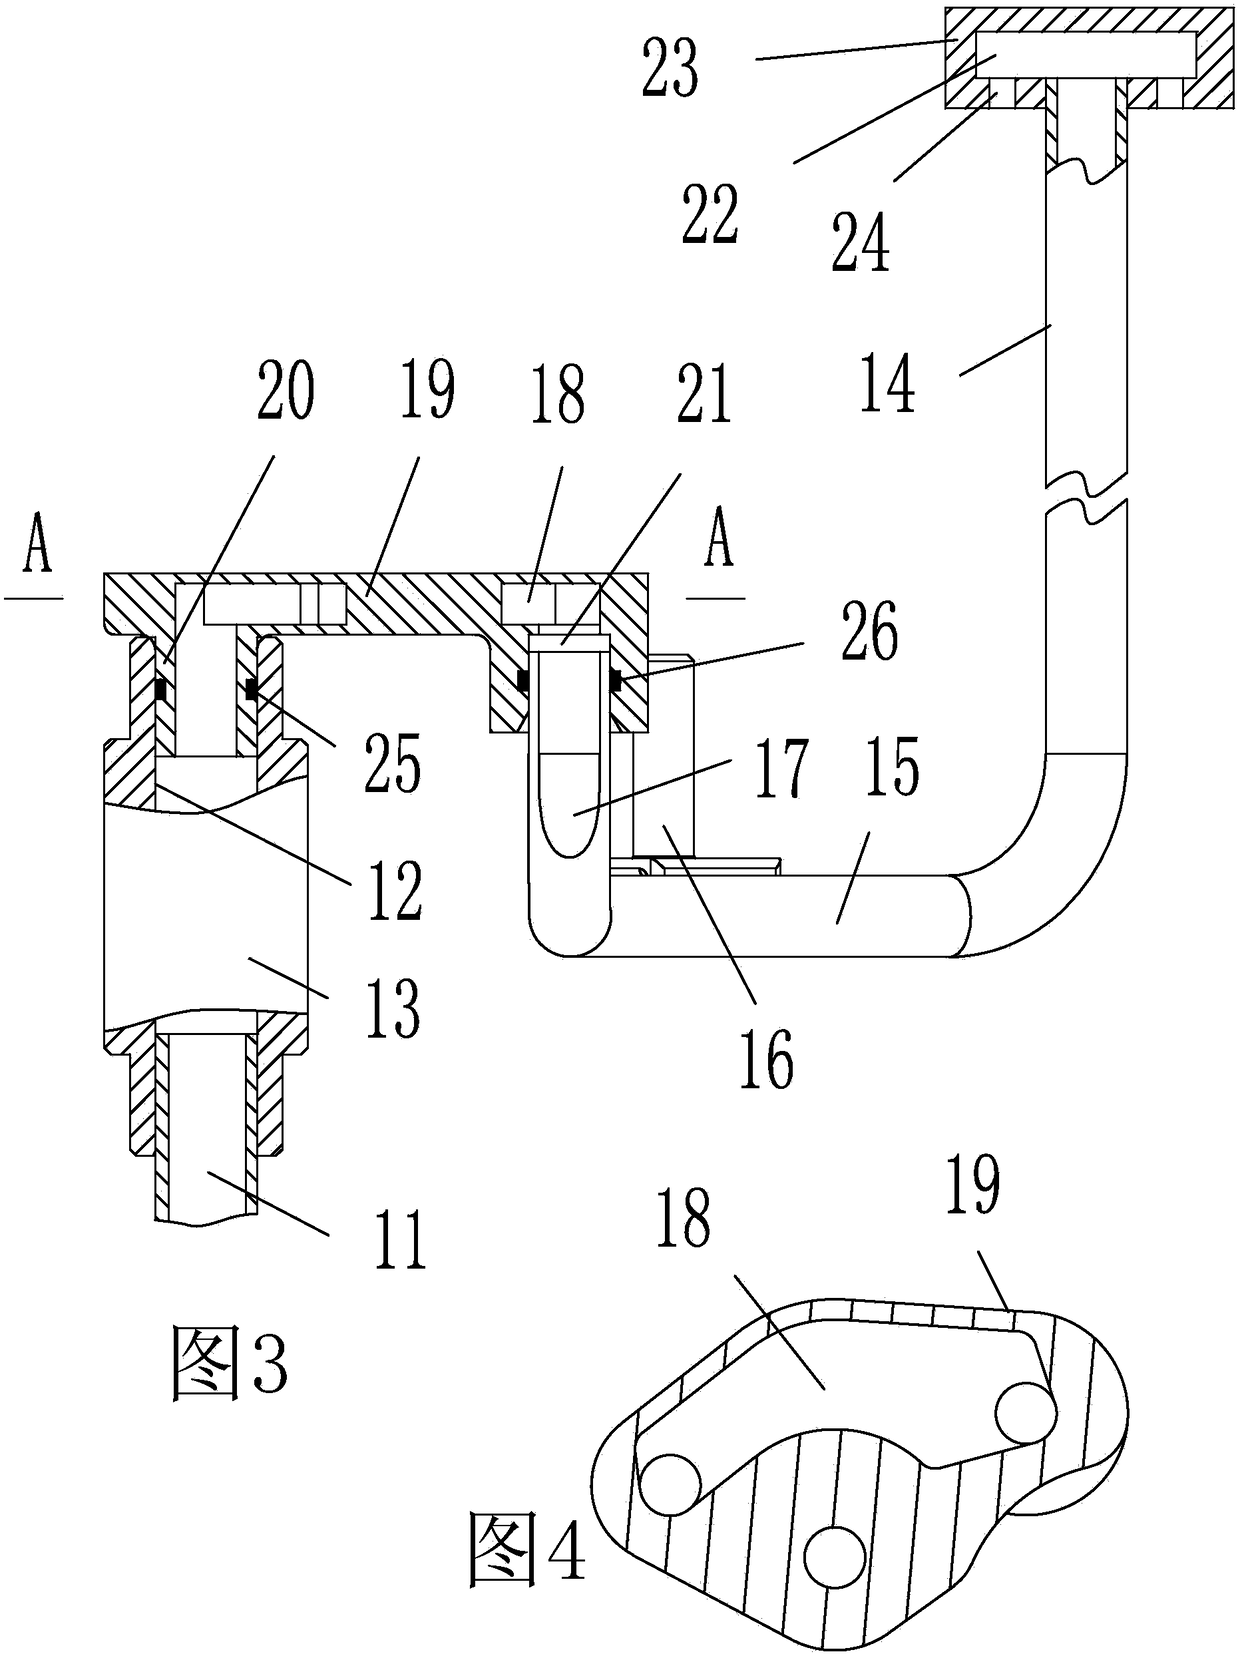 Lubrication structure of dual clutch hybrid transmission